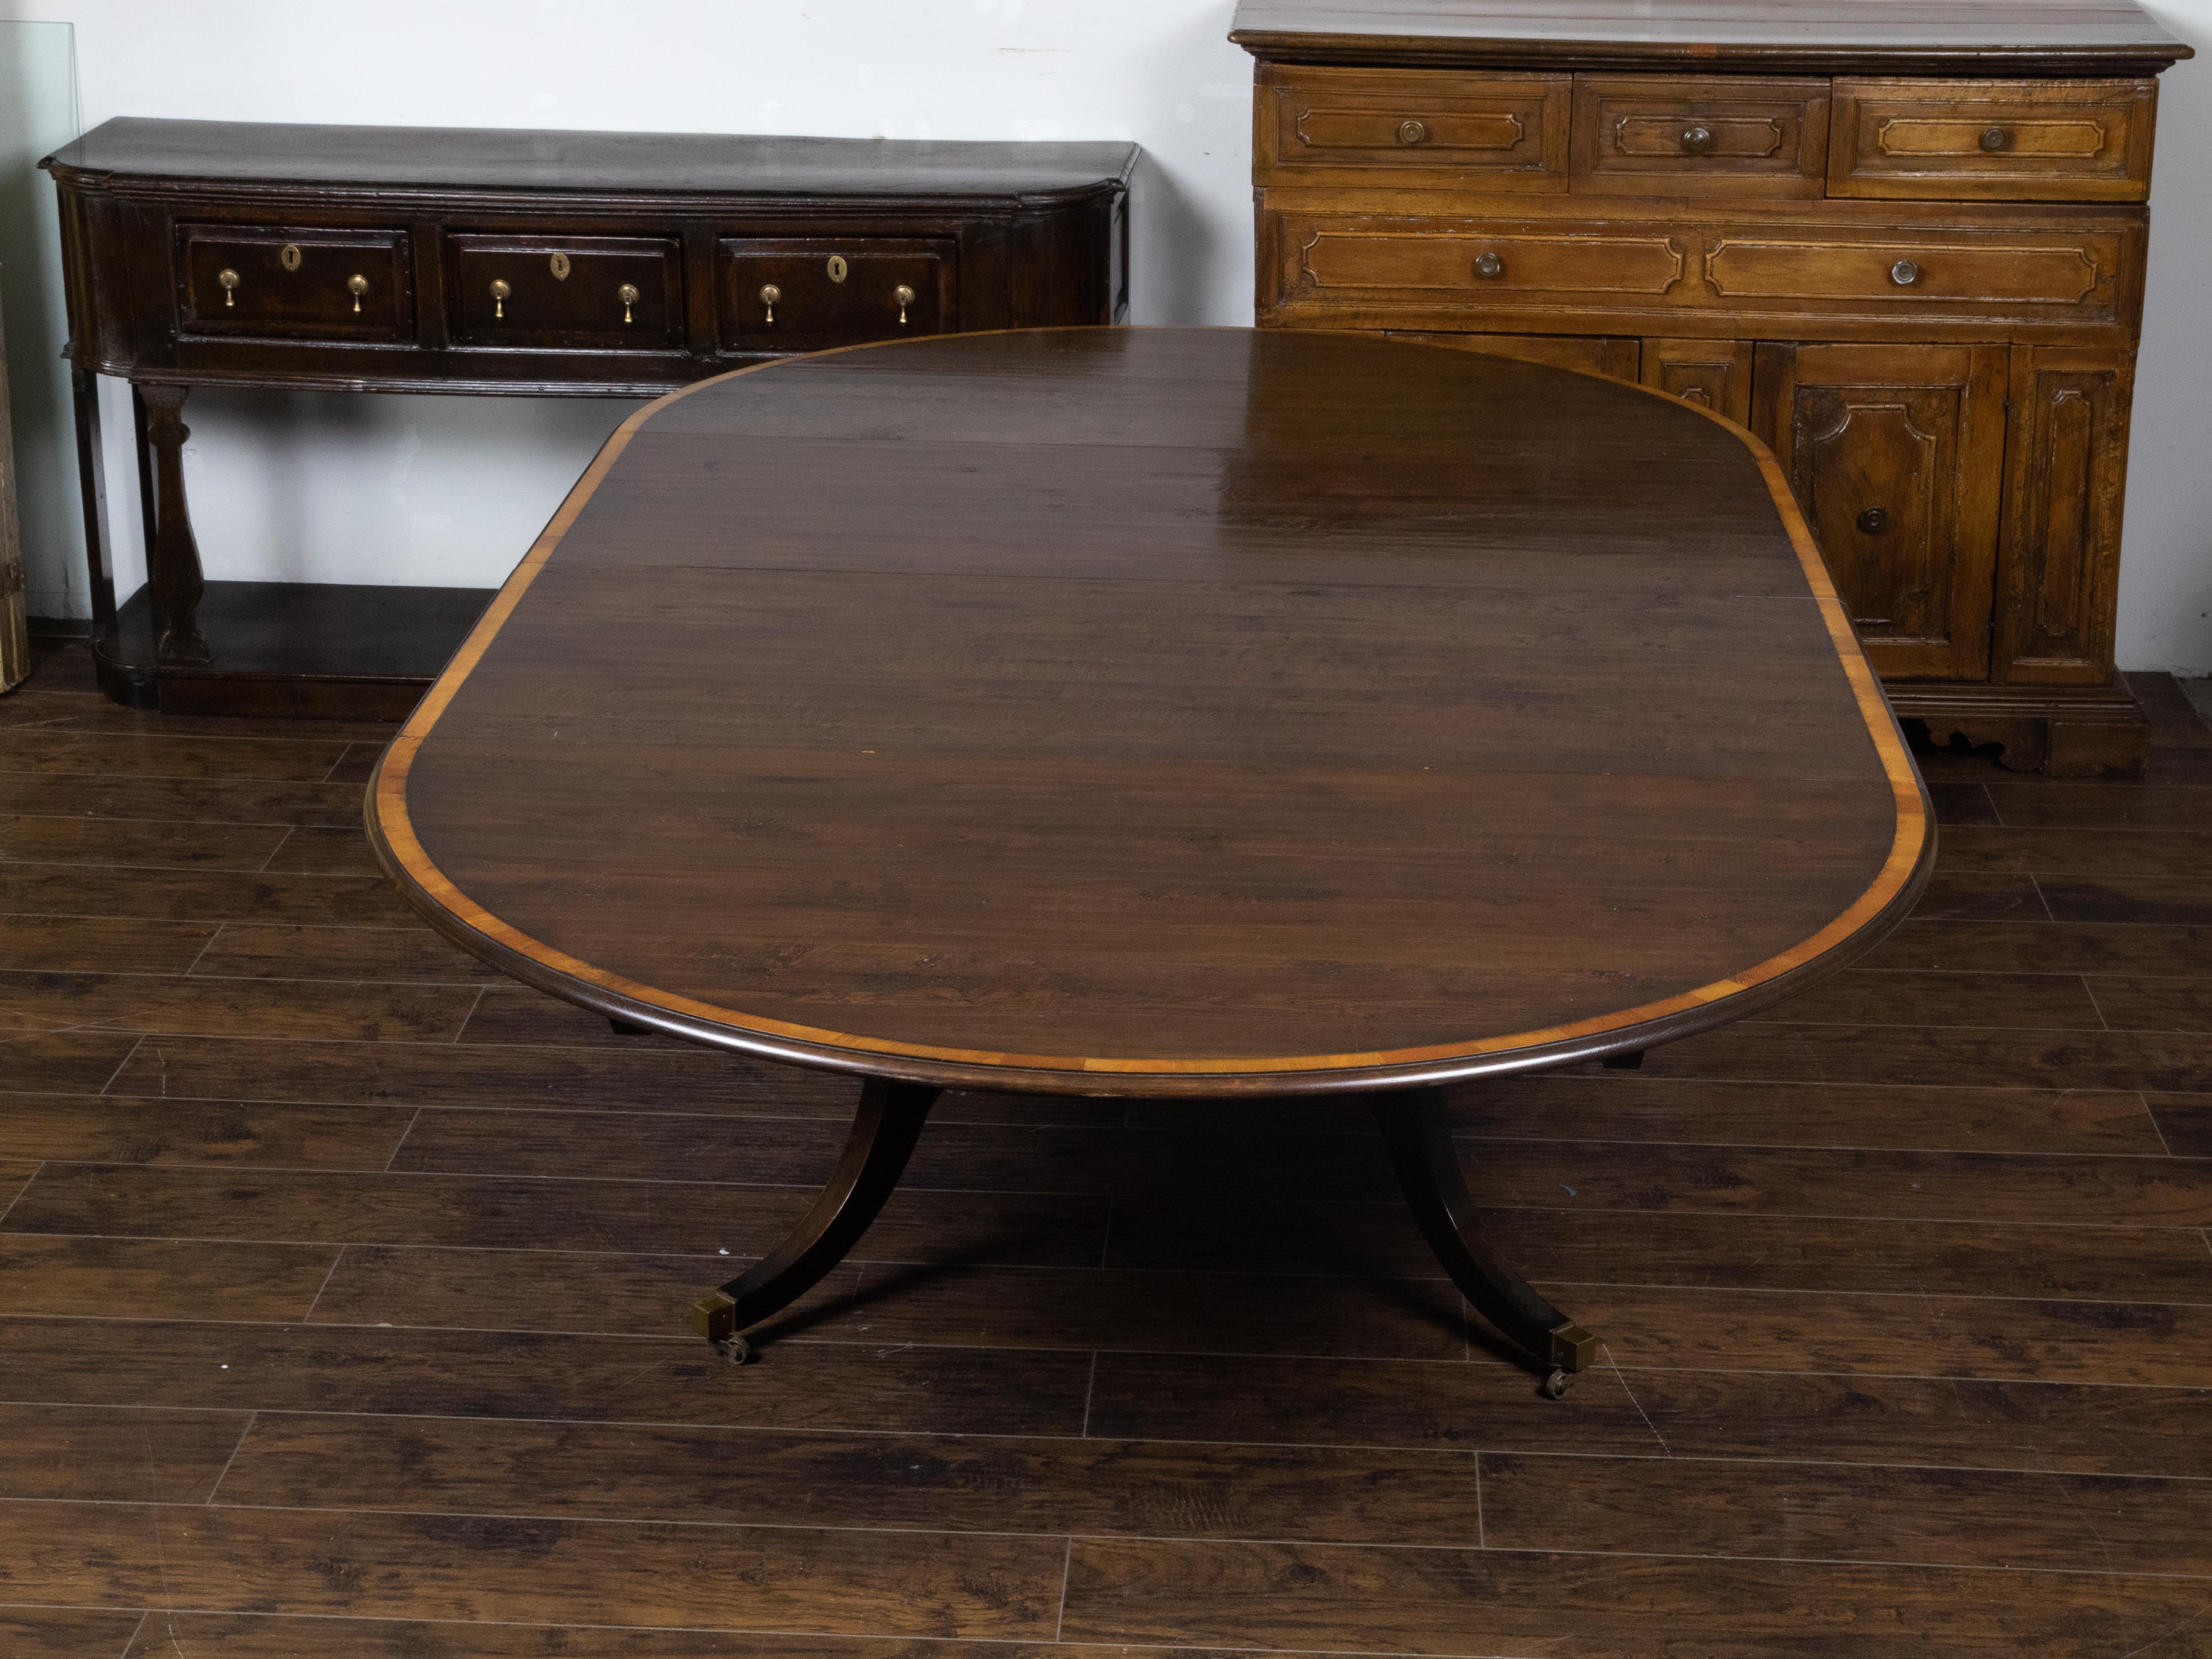 20th Century Vintage English Oak Extension Table with Two Leaves and Four Legs on Casters For Sale